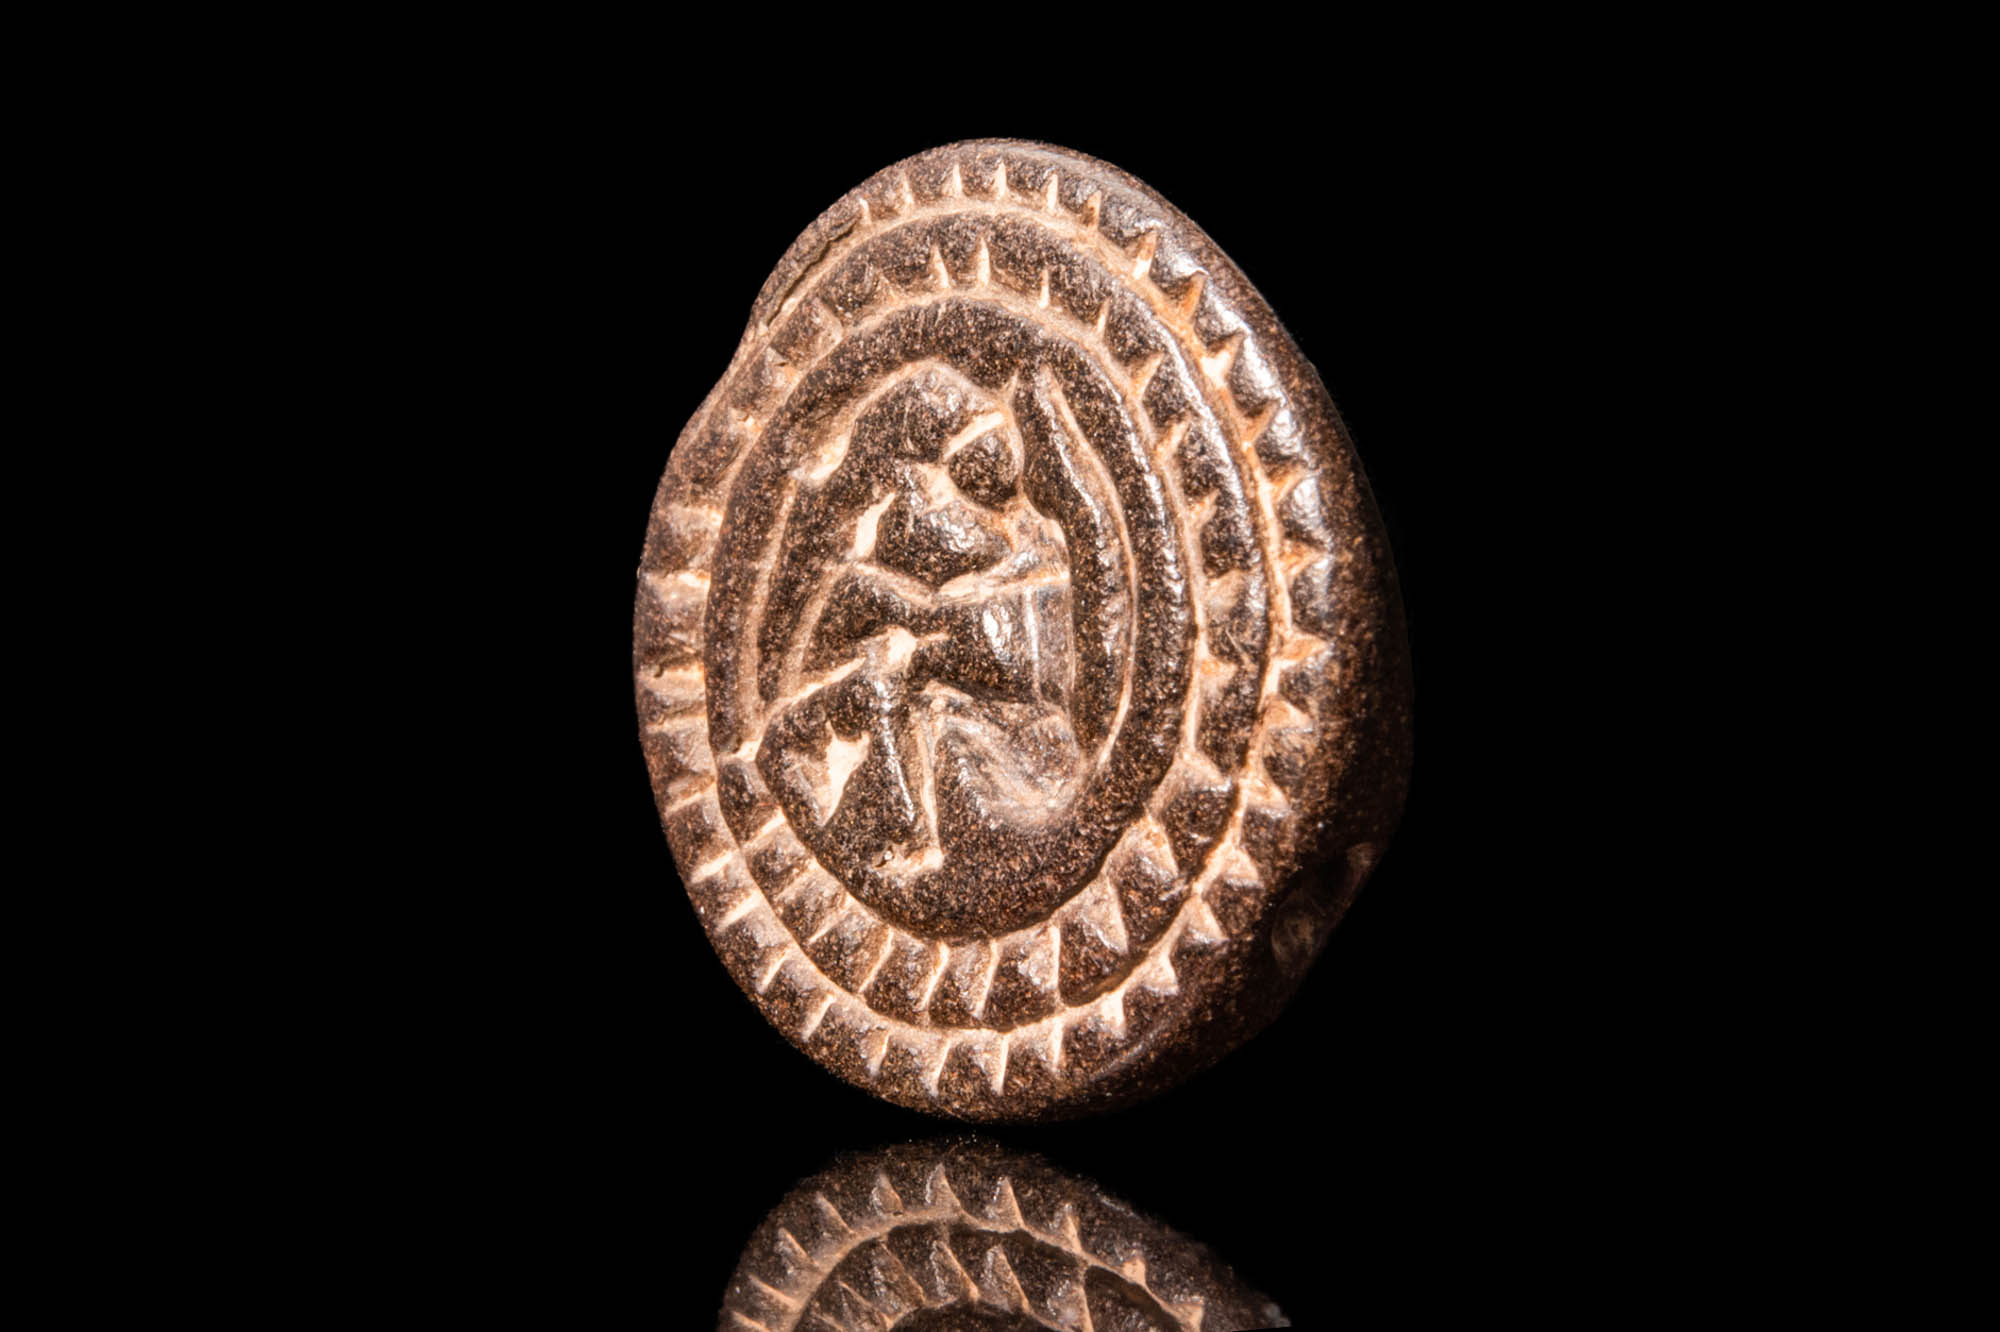 MESOPOTAMIAN STONE STAMP SEAL WITH A MONKEY - Image 2 of 4